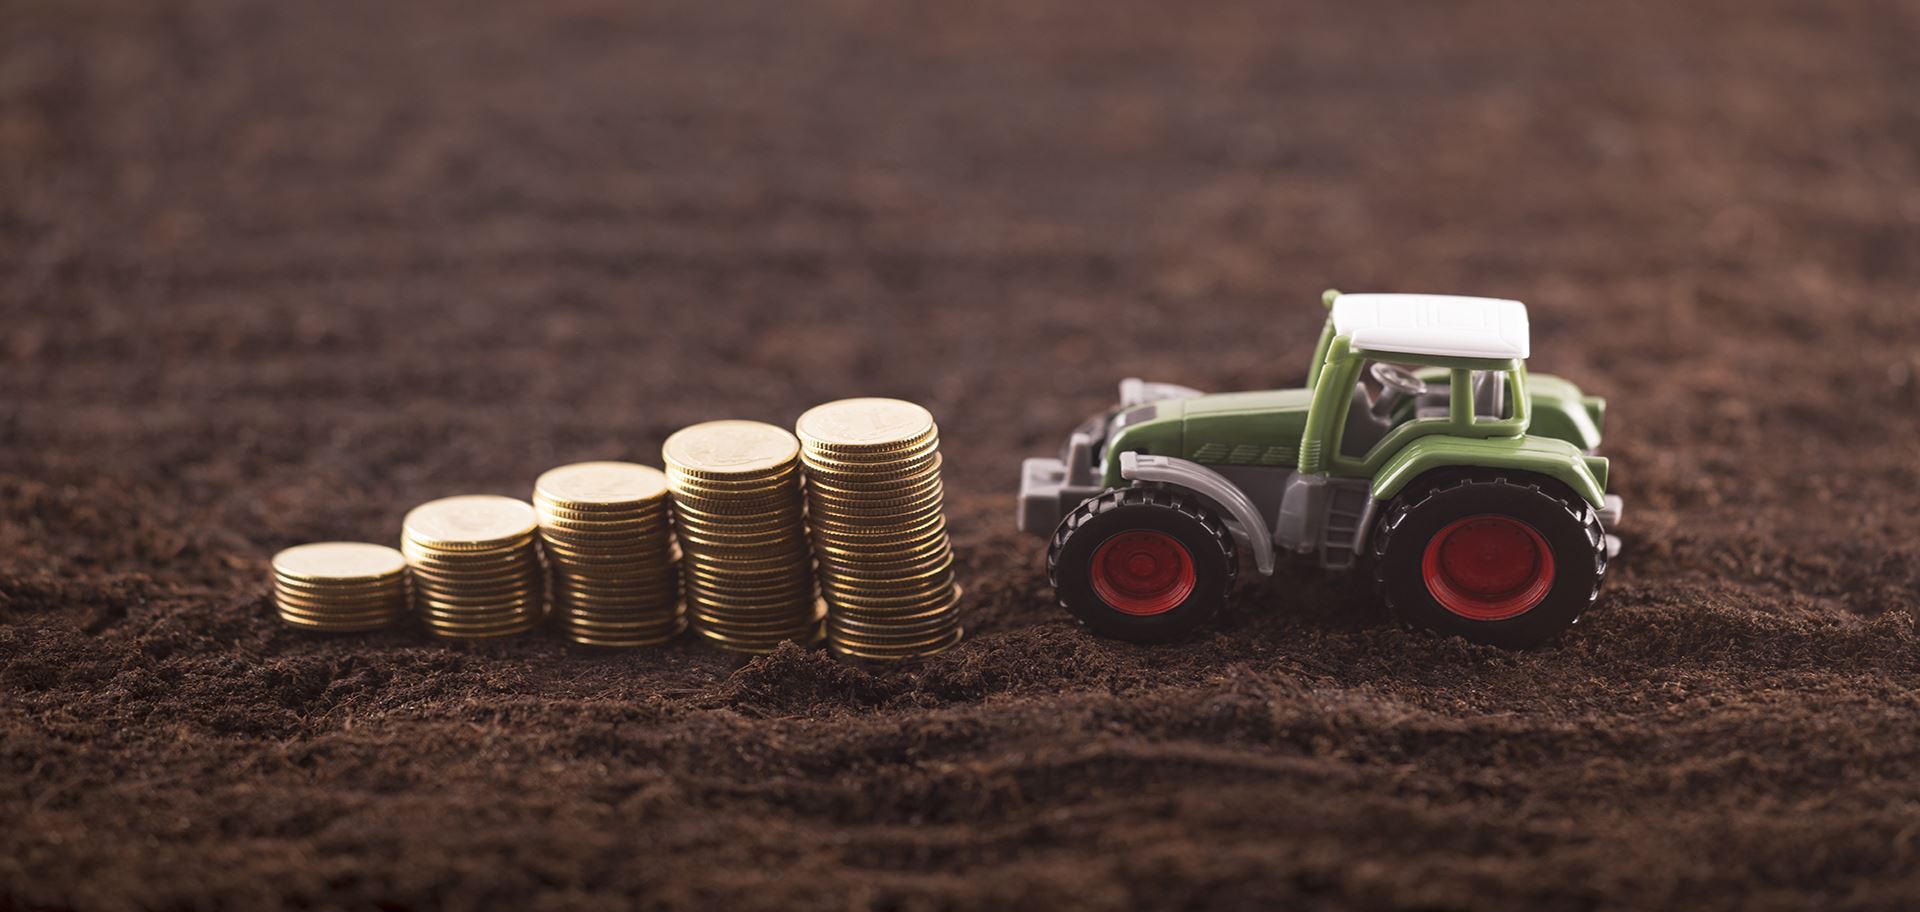 coins stacked next to toy tractor